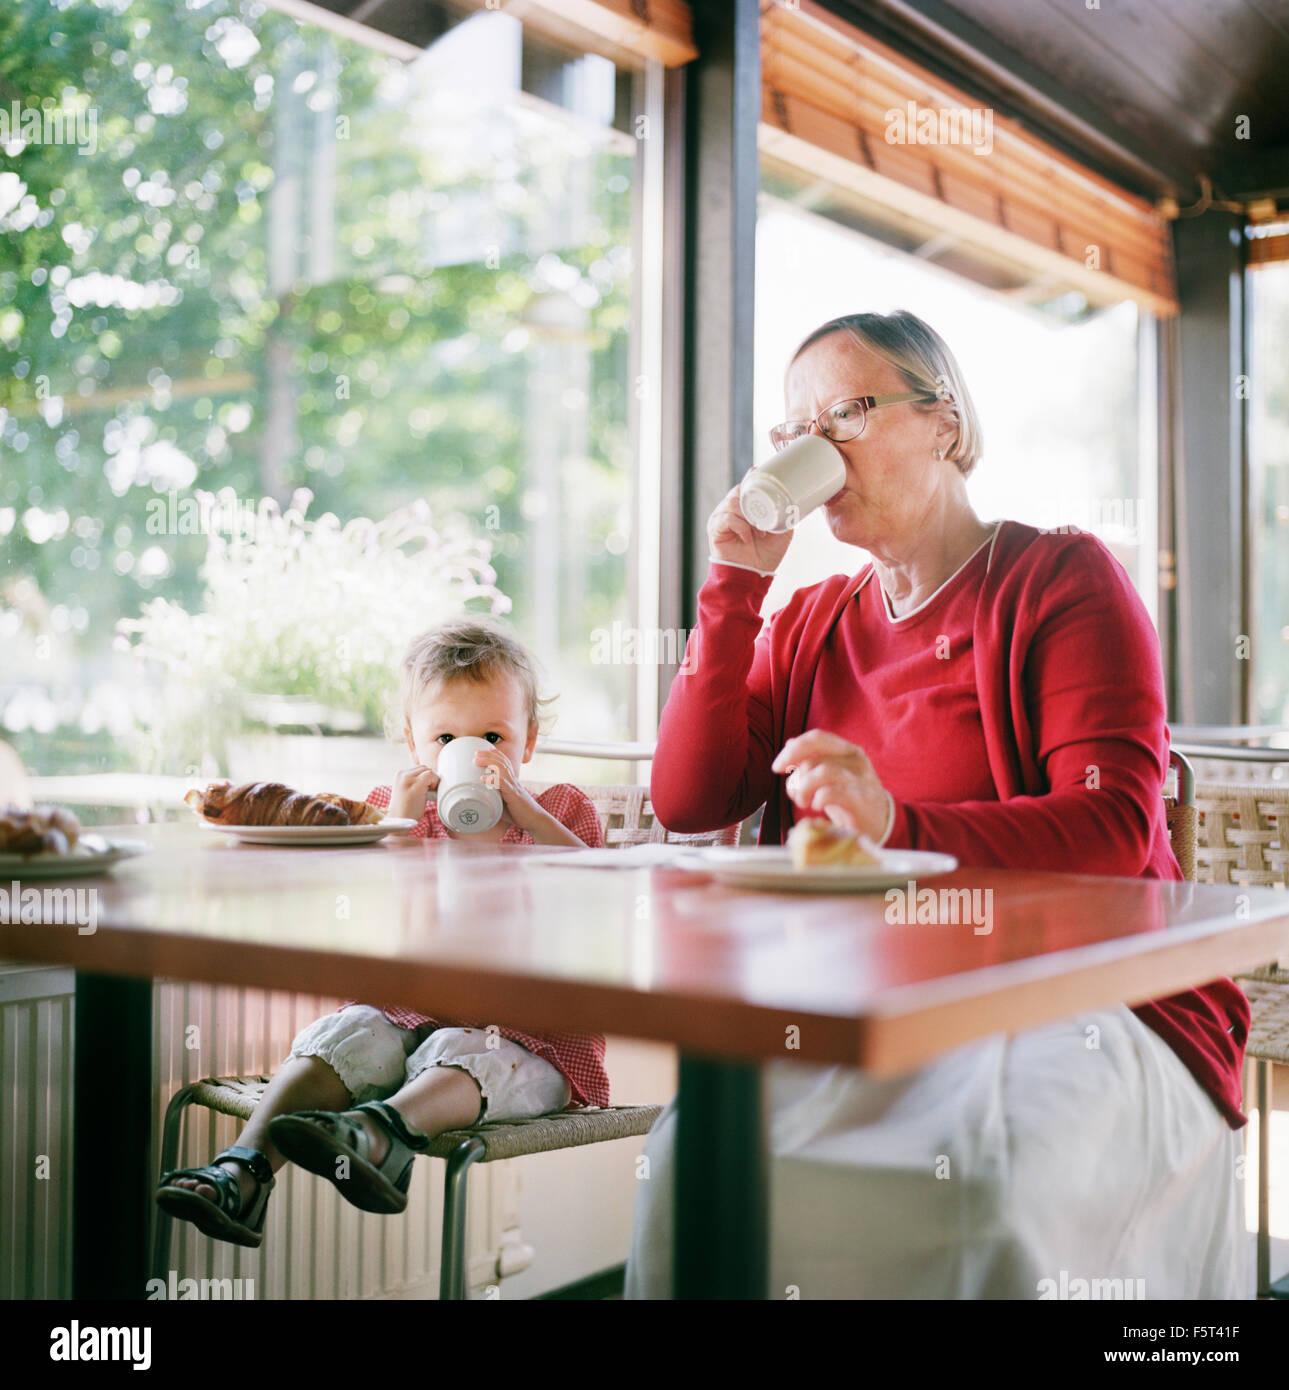 Finland, Helsinki, Uusimaa, Grandmother and granddaughter (2-3) relaxing in cafe Stock Photo